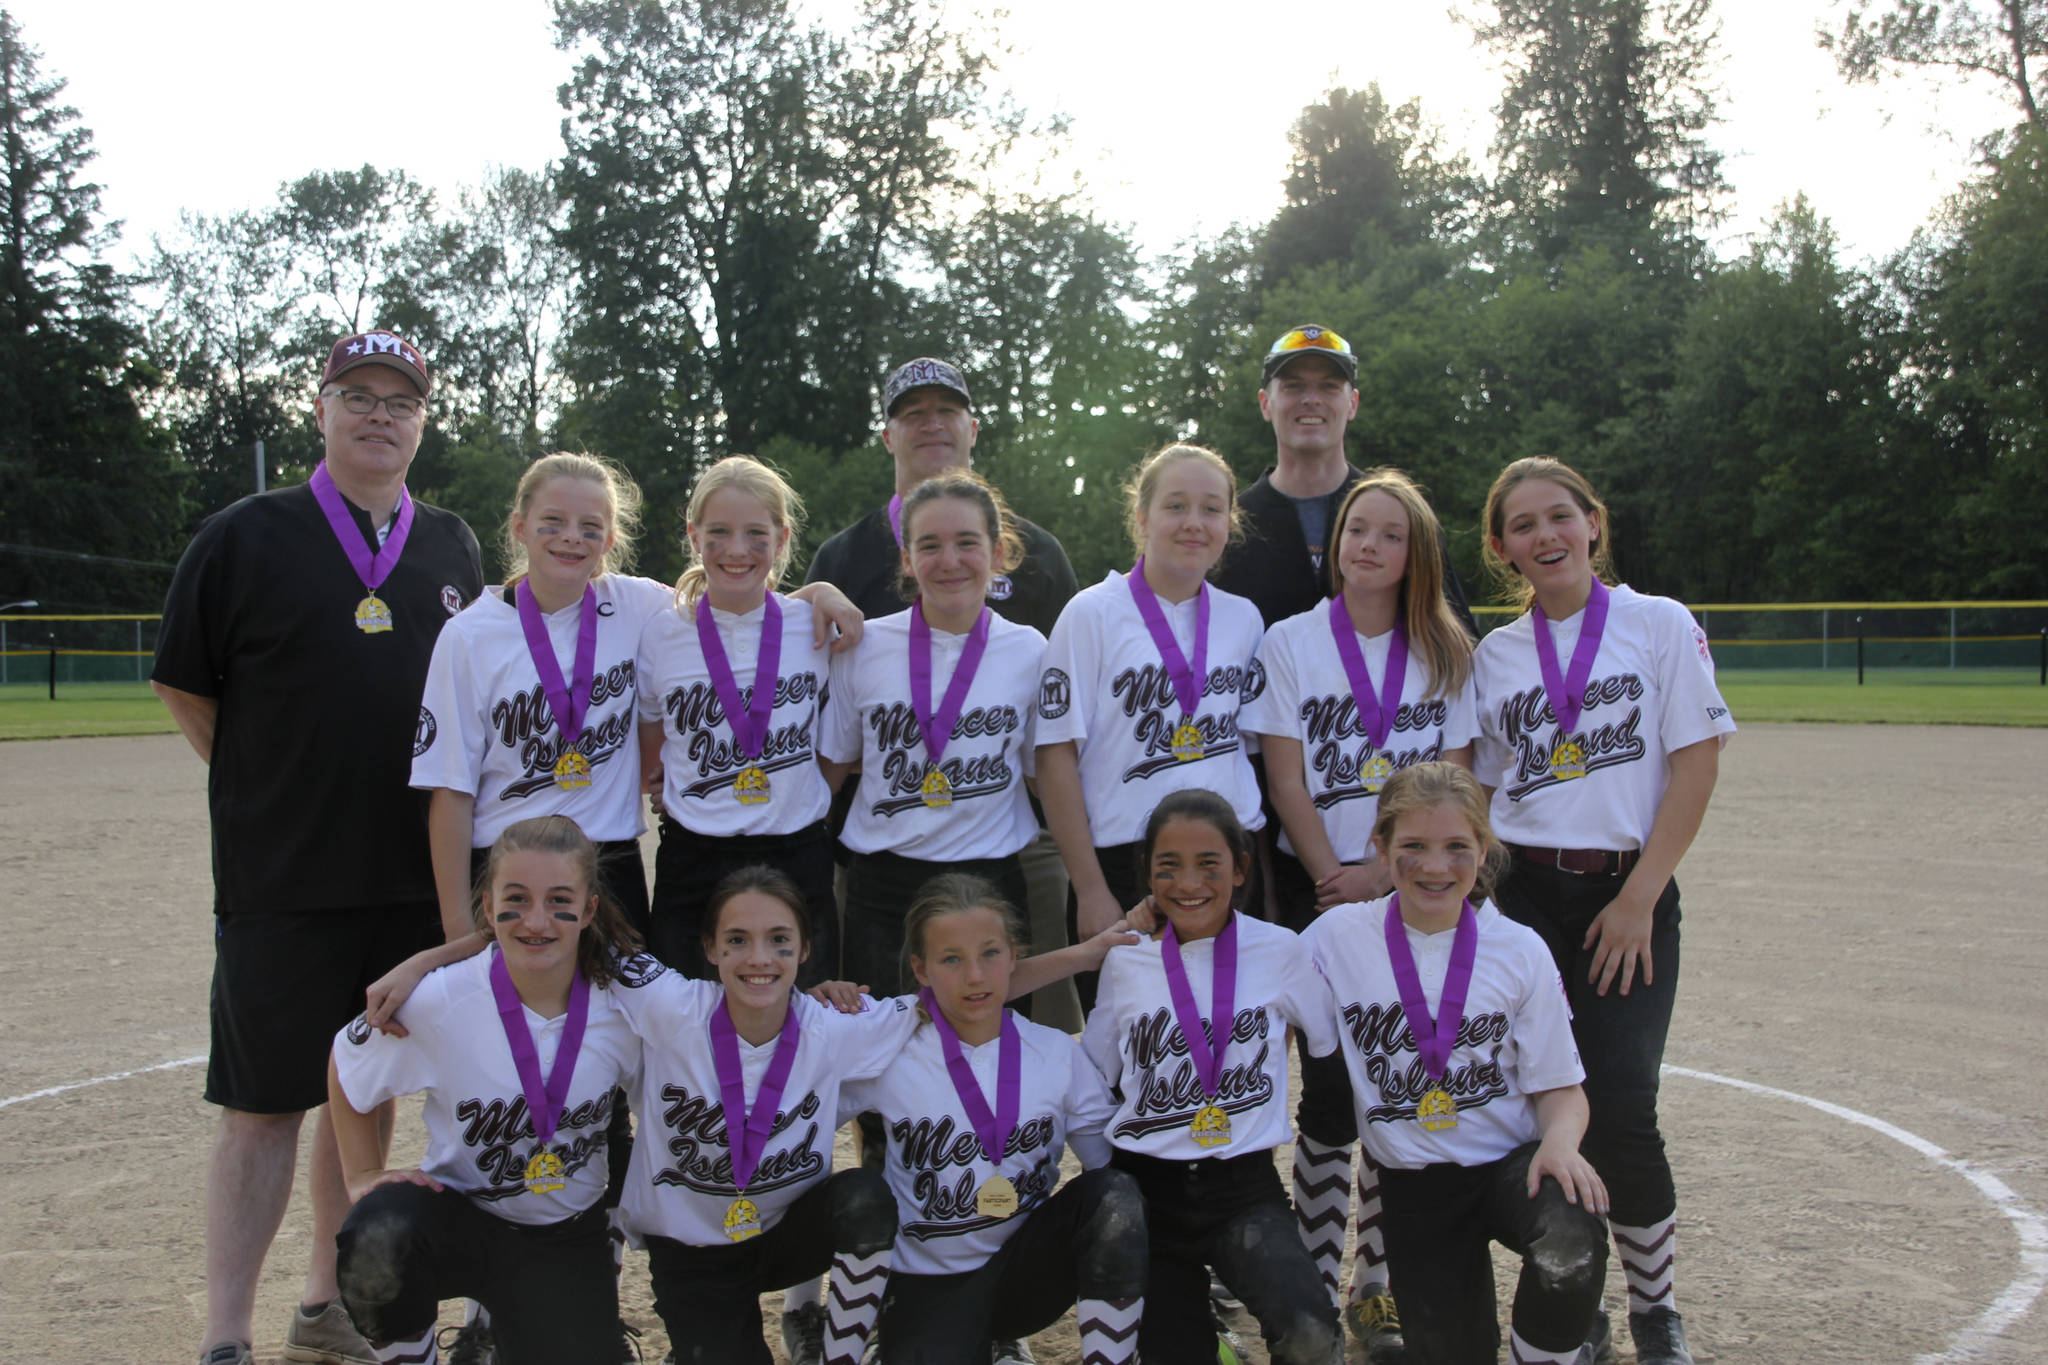 The Mercer Island Little League softball all-star majors team, which is comprised of players between 11-12 years of age, competed in the Little League Softball Division Washington District 9 all-star tournament from June 19-21 in Duvall. The MILL all-stars had an overall record of 1-2 at the tournament. They registered a win against Bellevue but suffered losses to Kirkland and Redmond.                                Members of the team included Annabel Little, Grace Cartwright, Joey Lurie, Poppy Walker, Ashlyn Powell, Katherine Montpellier, Sophia Pacecca, Neve Kelley, Shannon Rogan, Erica Kierstead and Addie Bergman. The team was coached by Kevin Kelley (head coach) and assistants Paul Rogan and Allan Montpellier. Photo courtesy of Cindi Pacecca